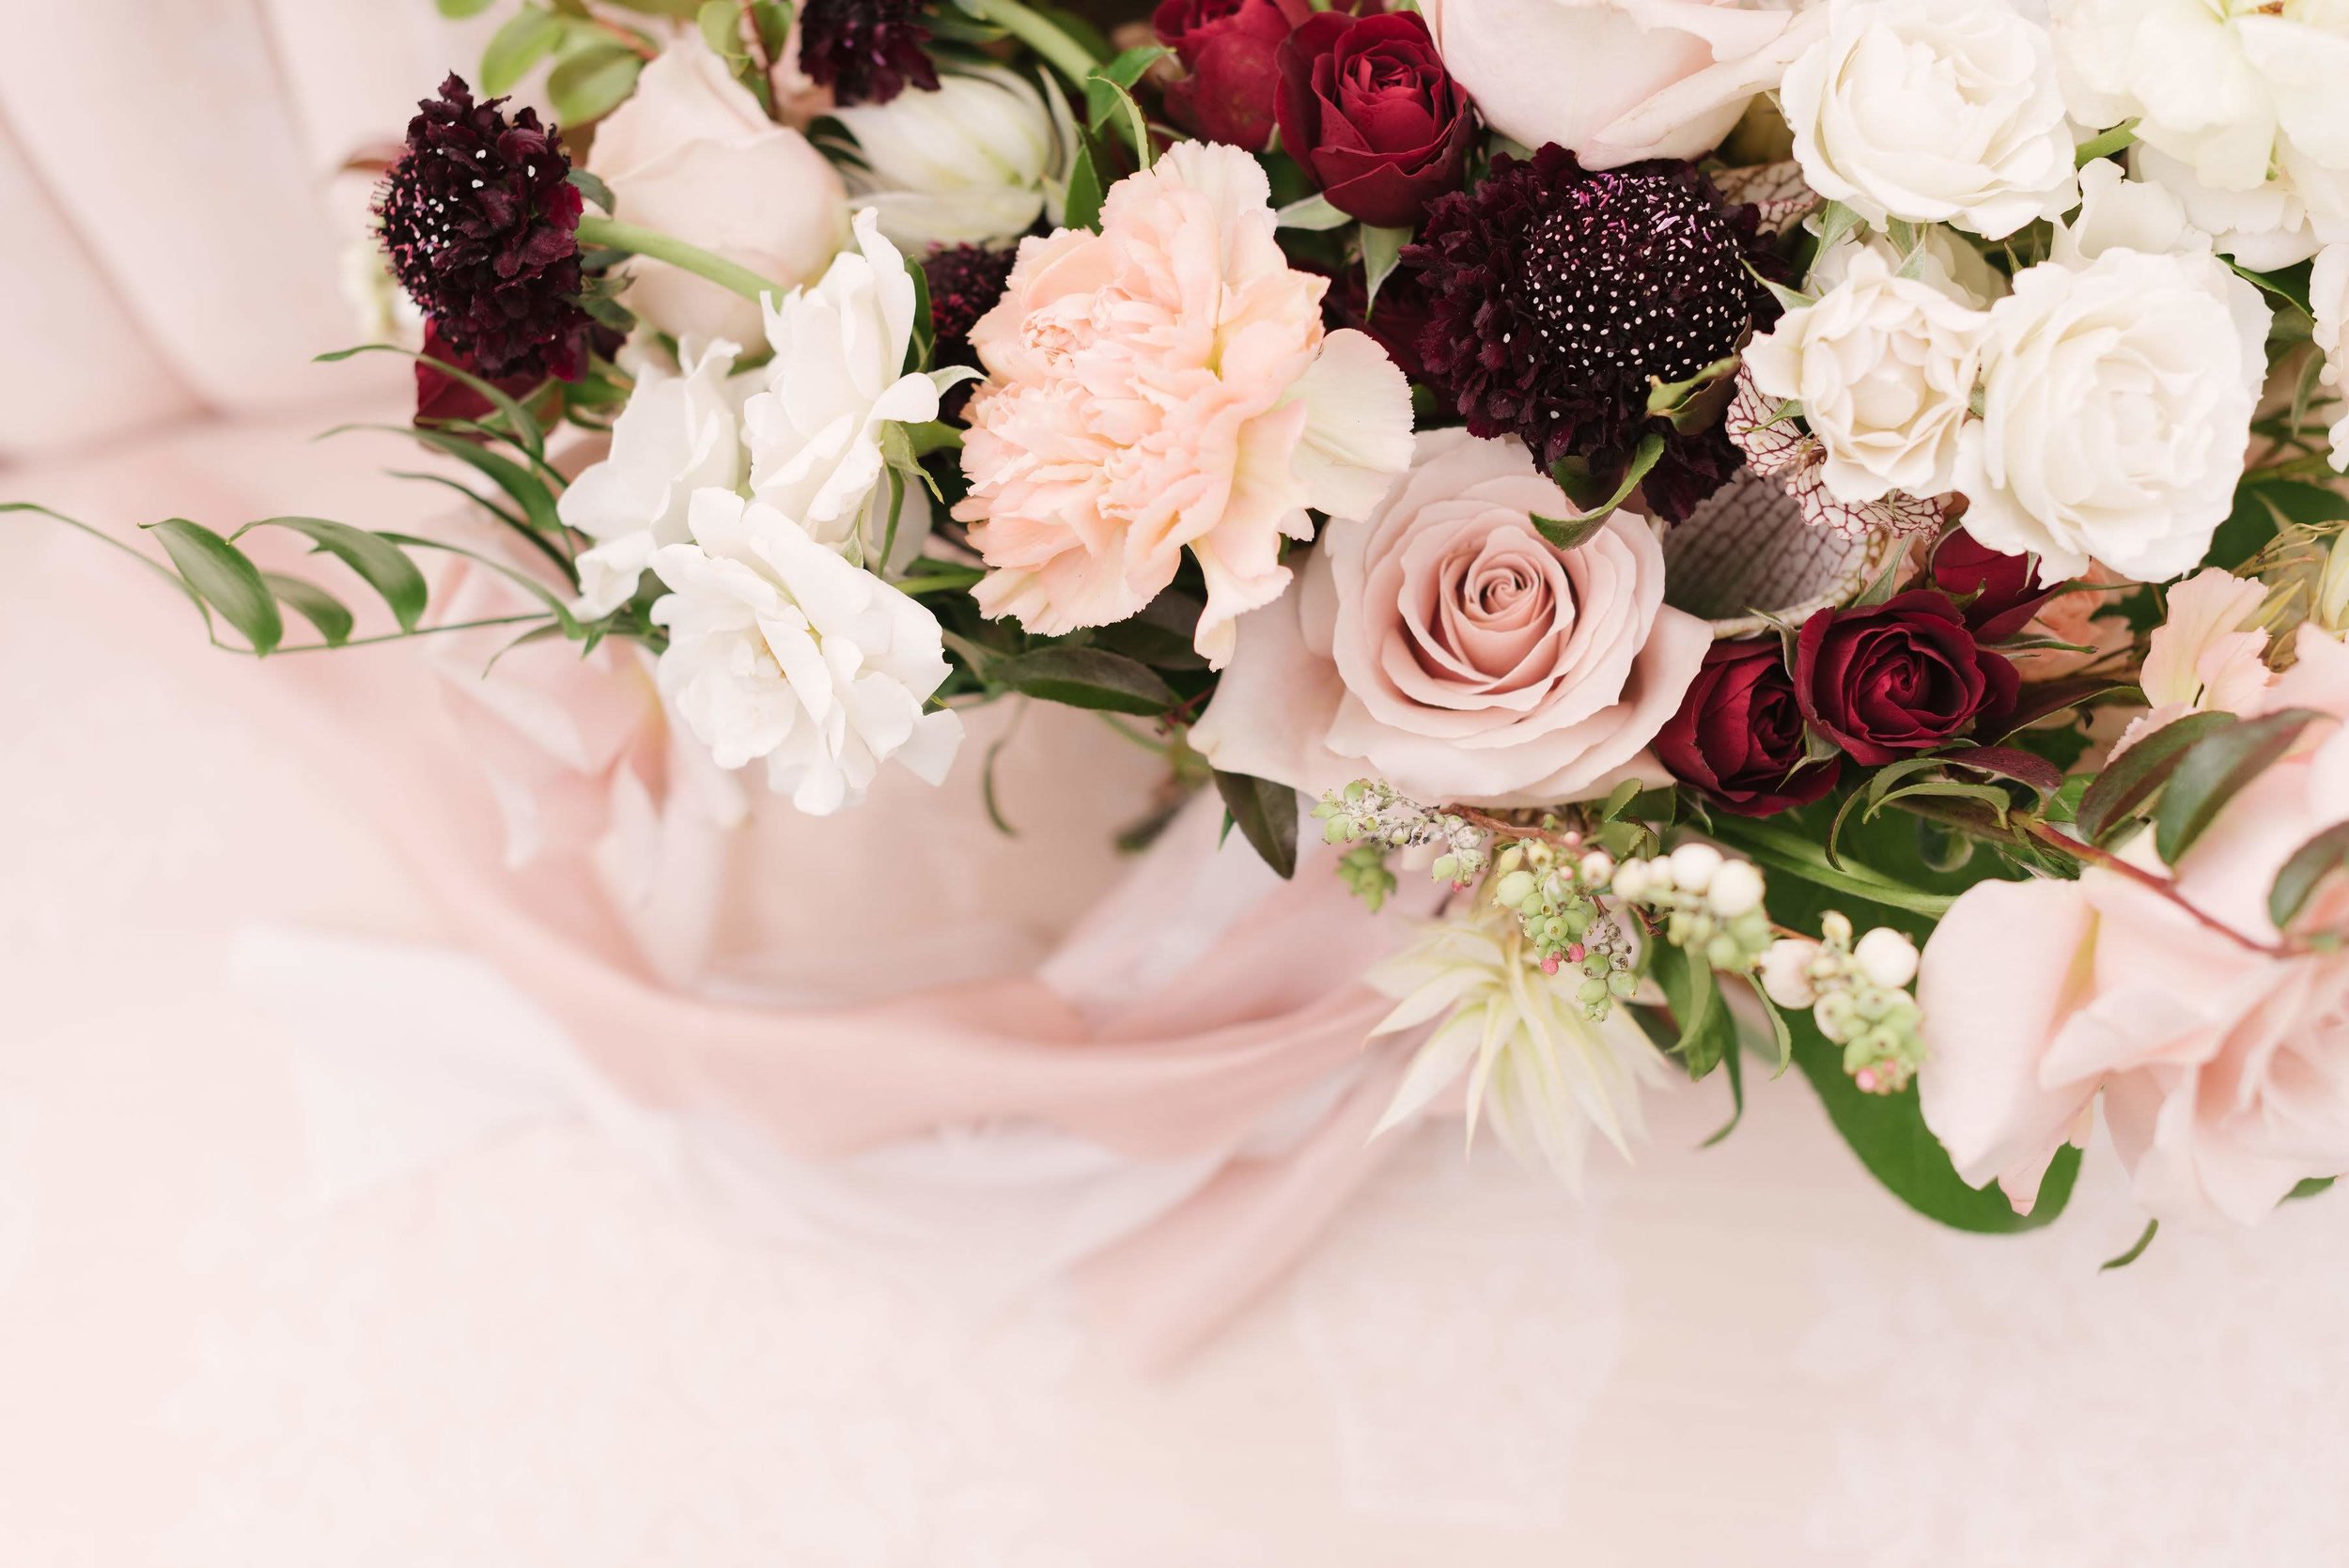 This bouquet deserves a second look!